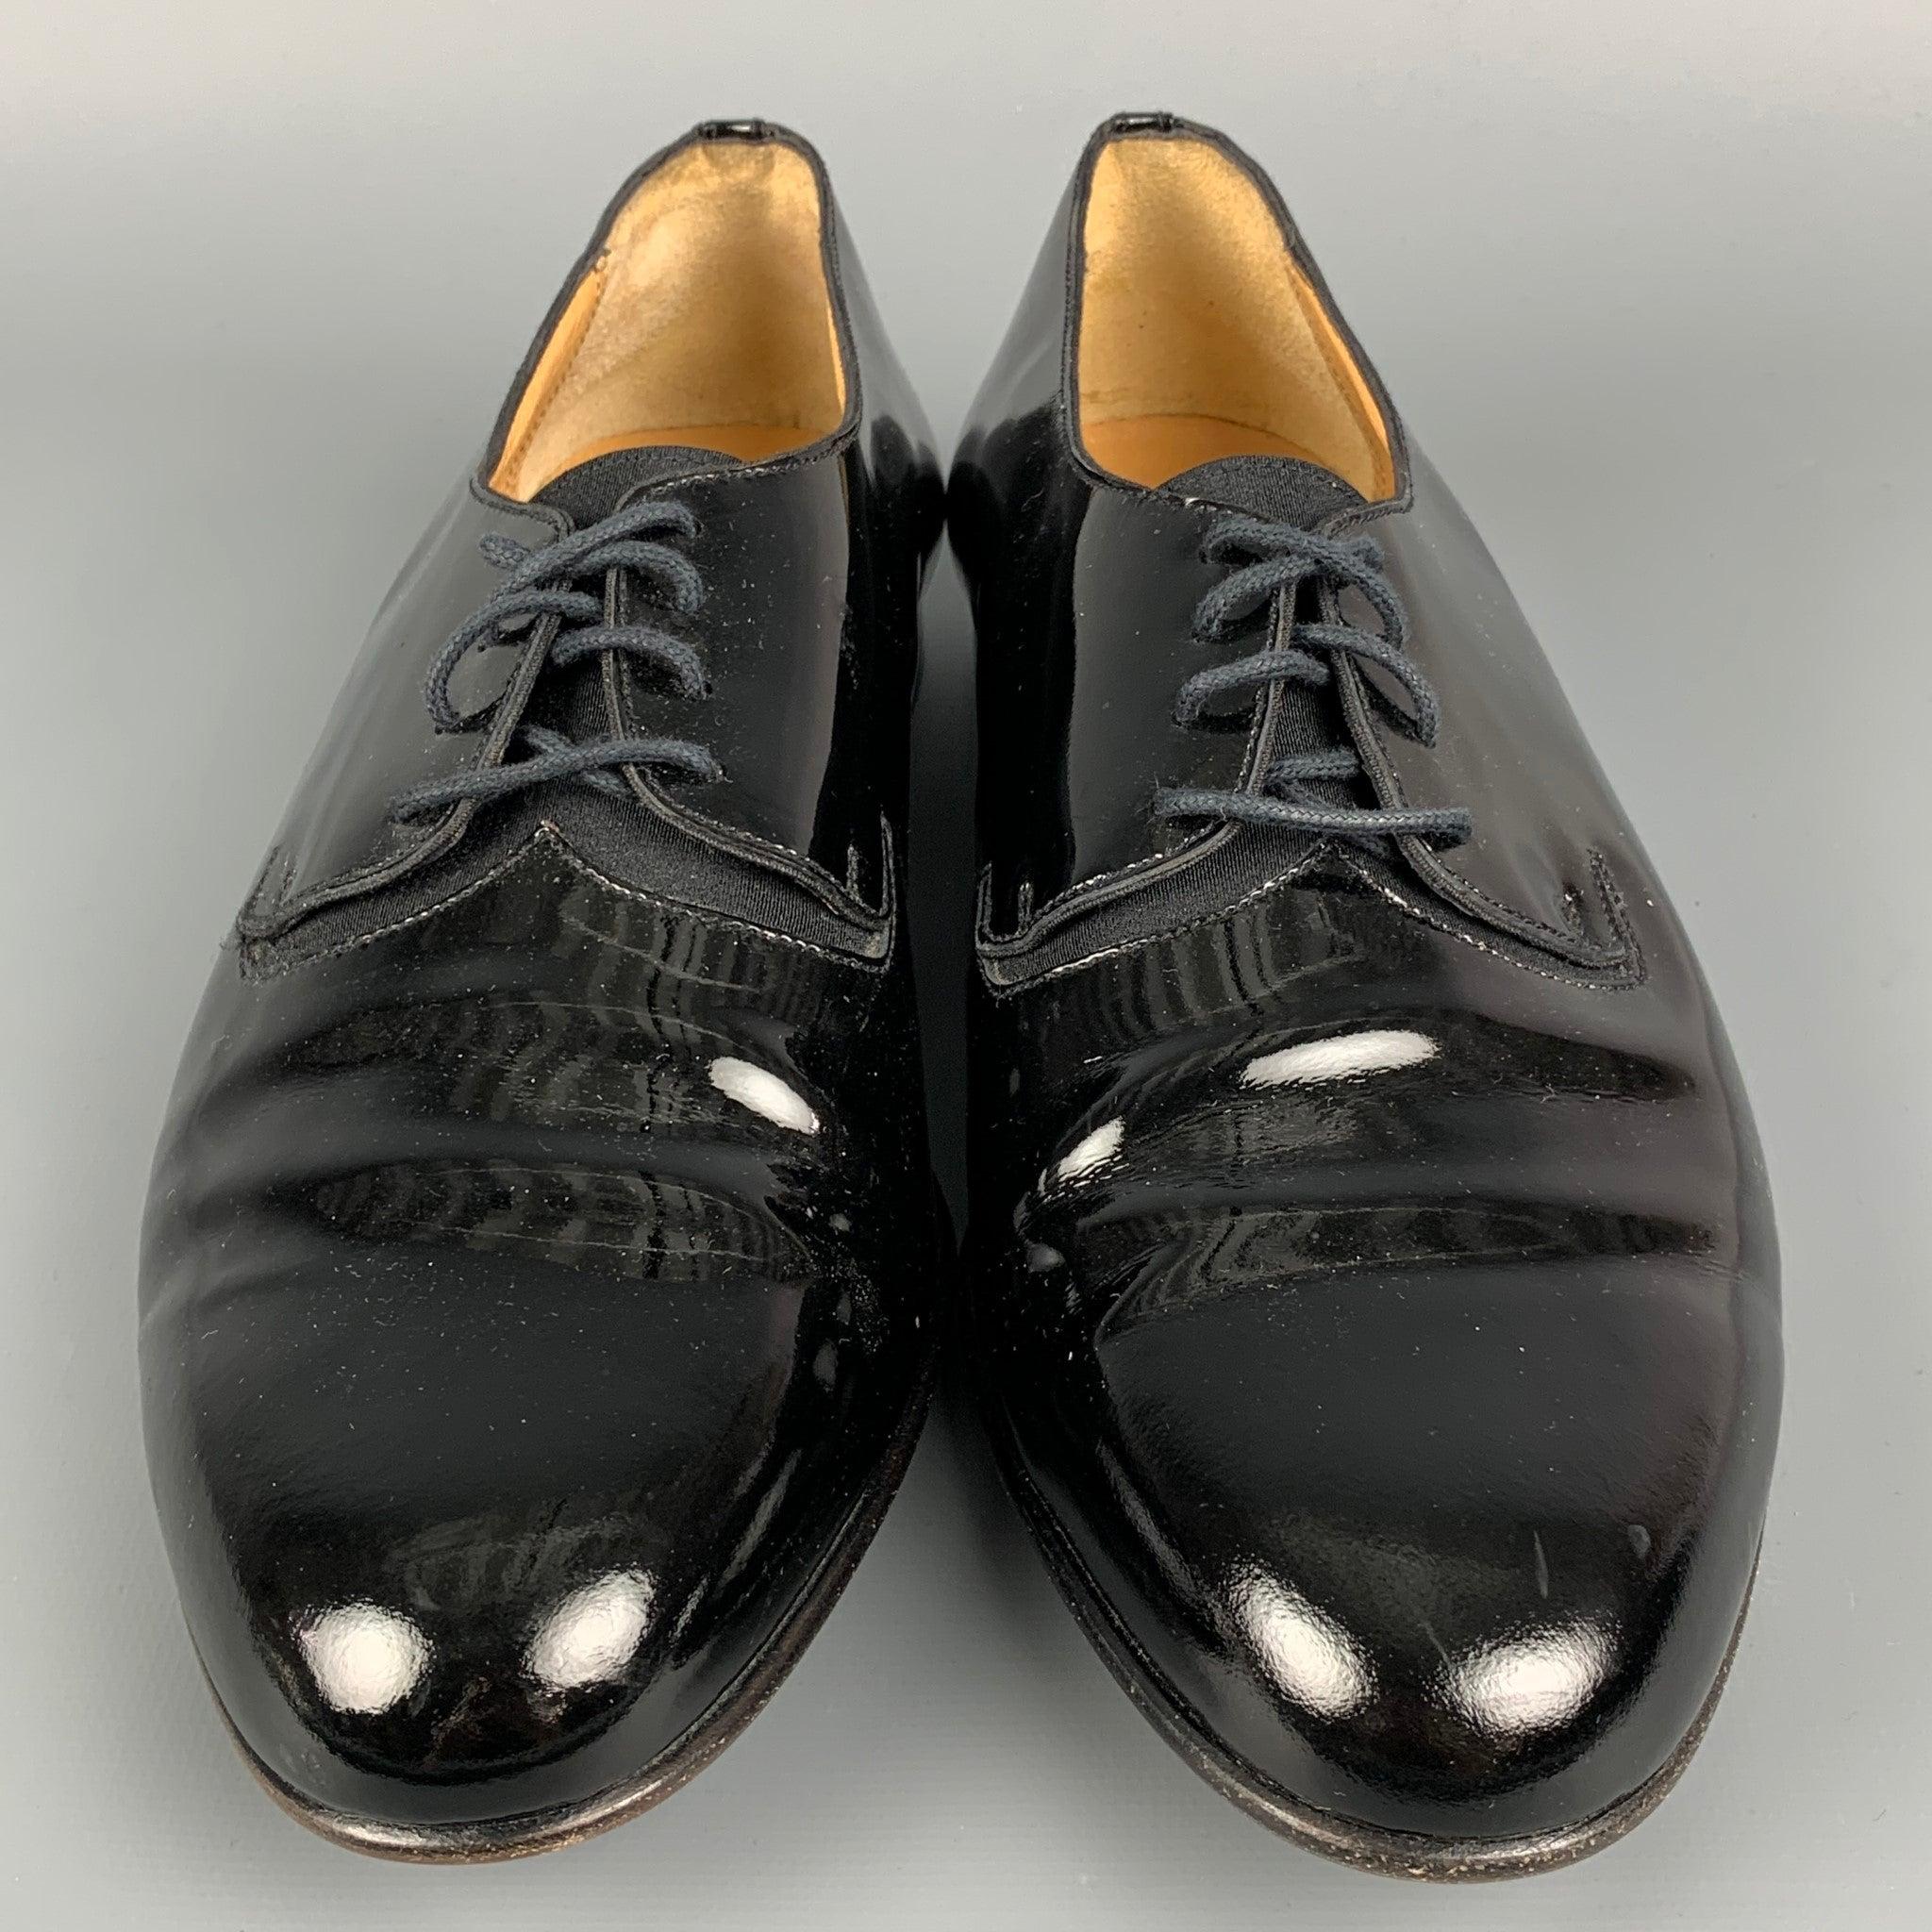 Women's BALLY Bice Size 8 Black Patent Leather Lace Up Shoes For Sale